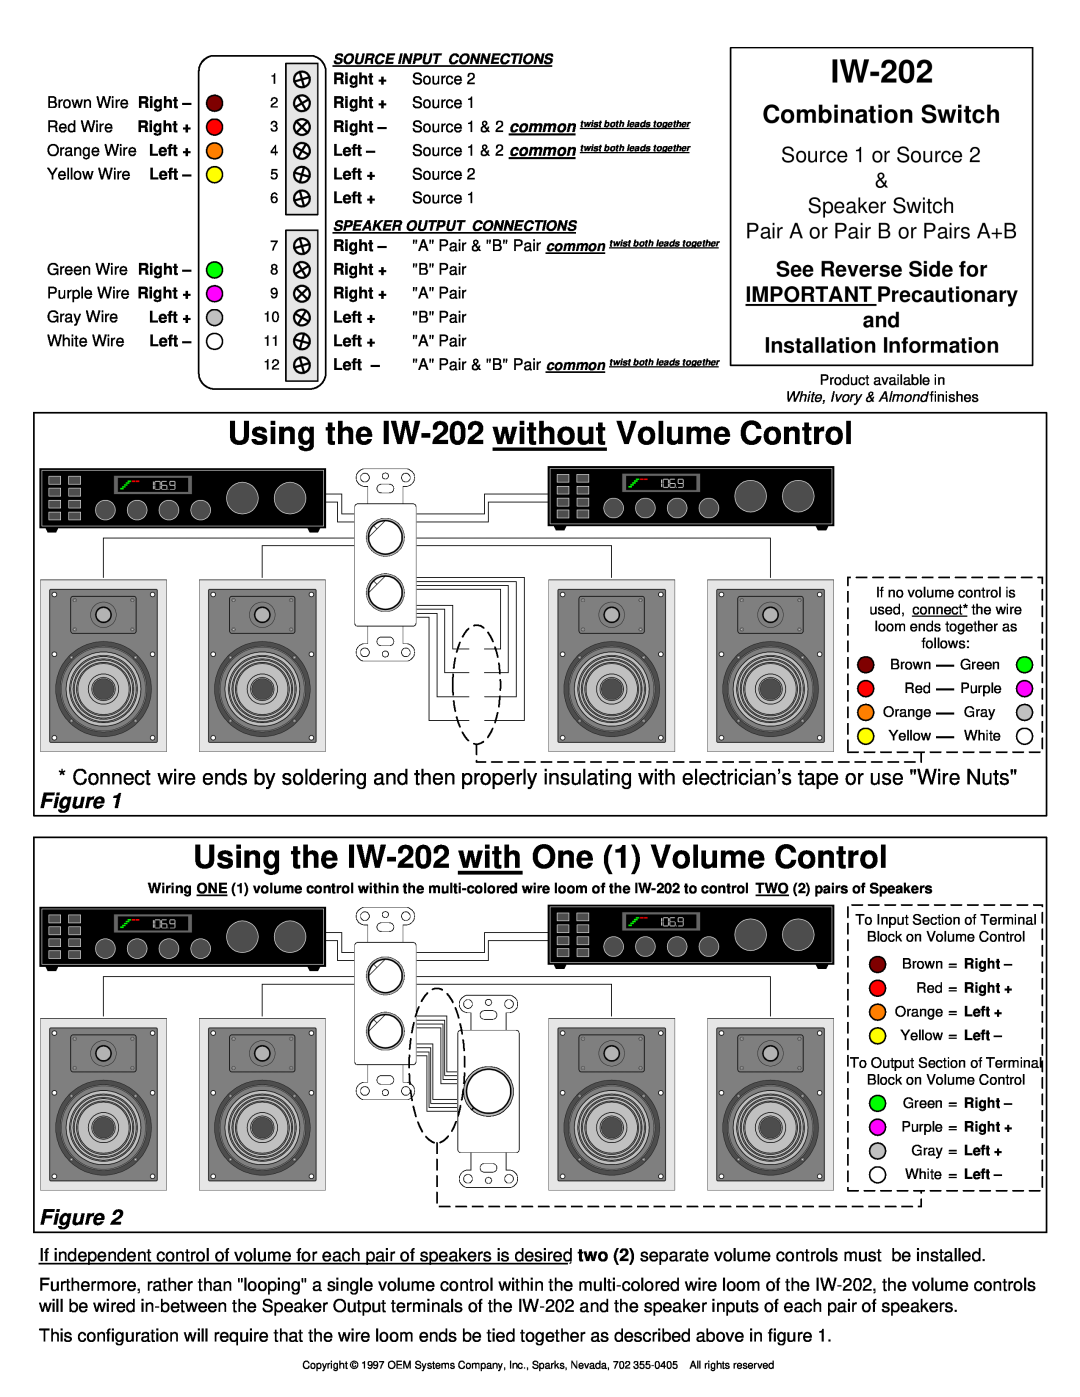 OEM Systems manual Using the IW-202 withoutVolume Control, Combination Switch, Source 1 or Source & Speaker Switch 